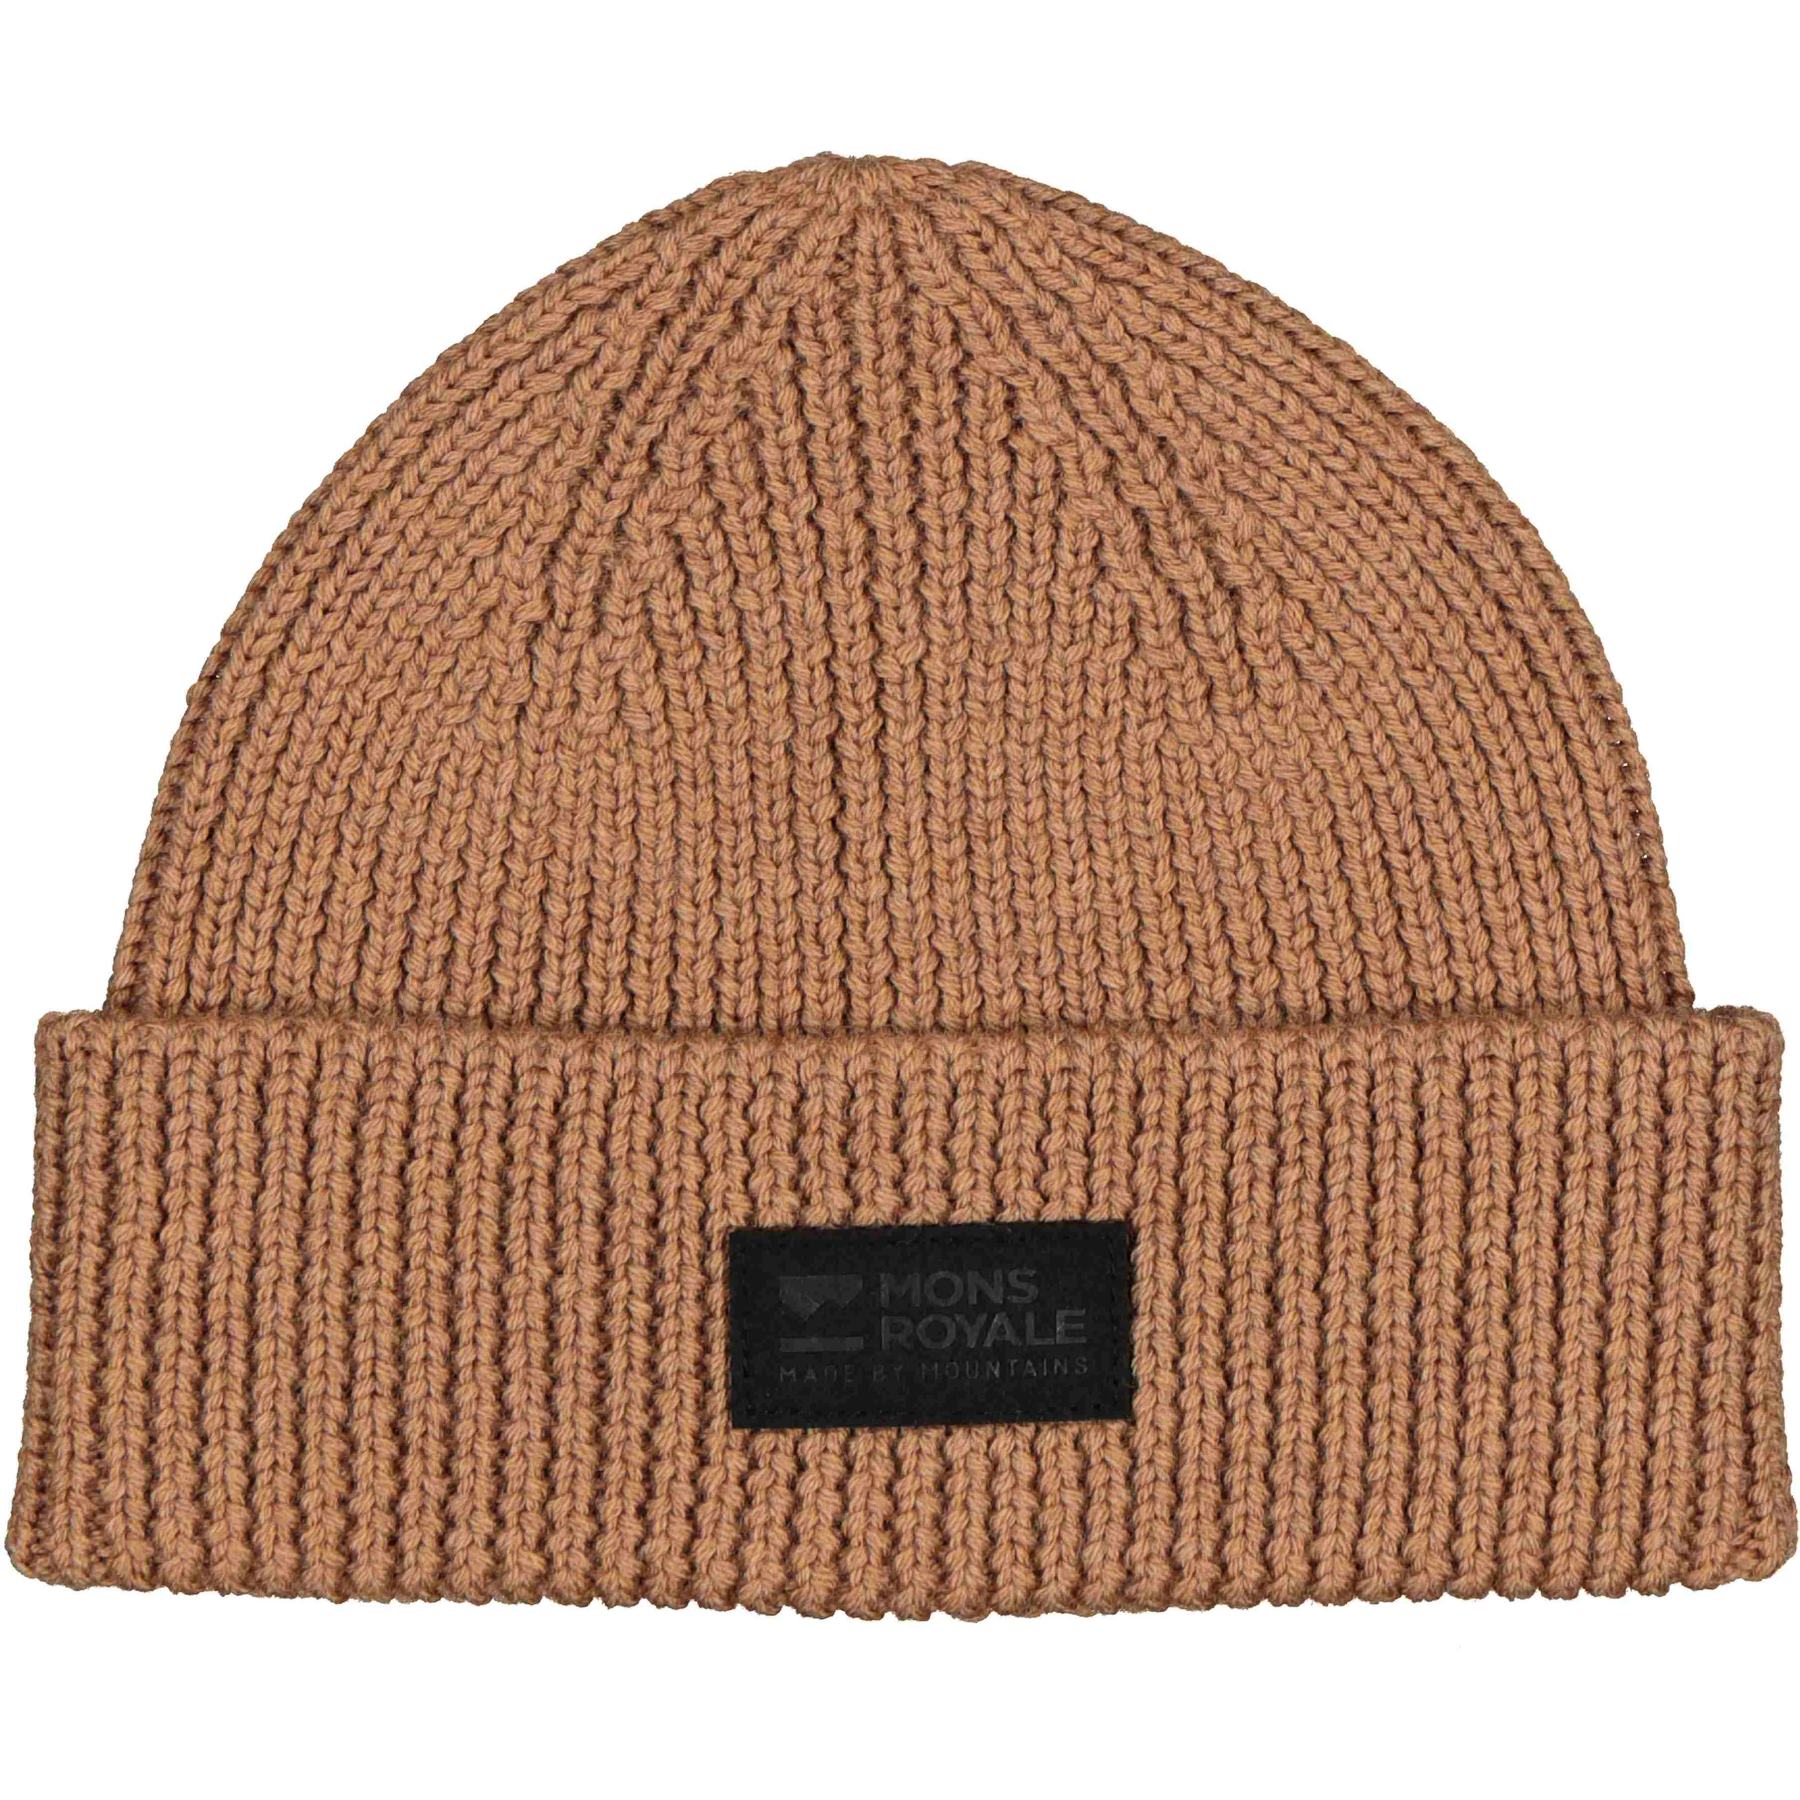 Image of Mons Royale Fishermans Beanie - toffee marl